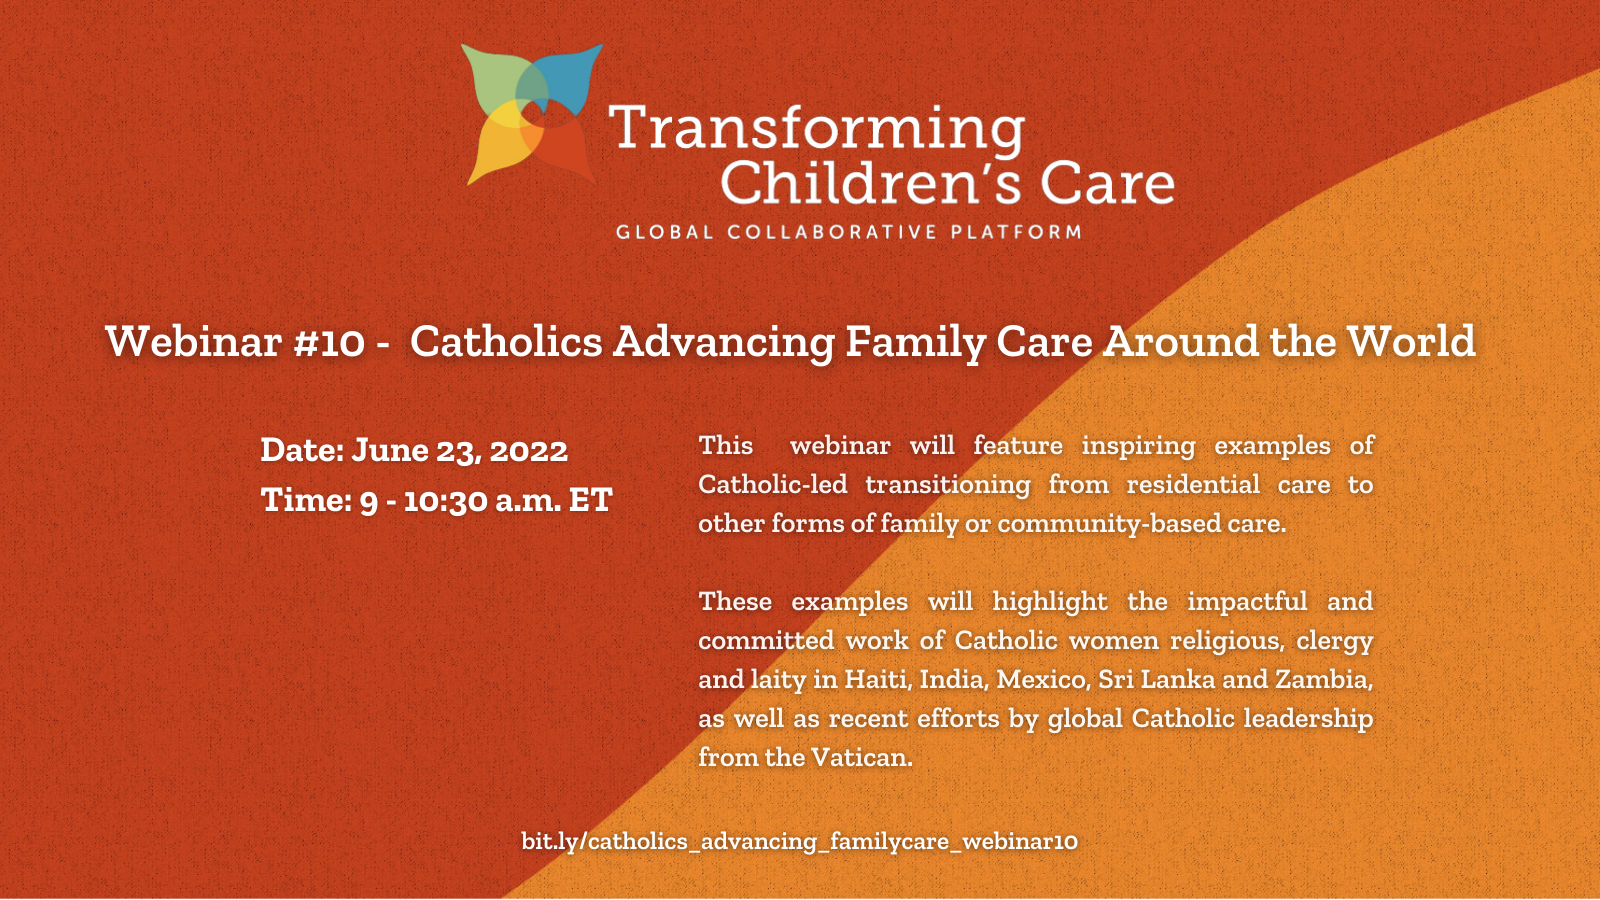 Transforming Children's Care Global Collaborative Care - Catholics Advancing Family Care